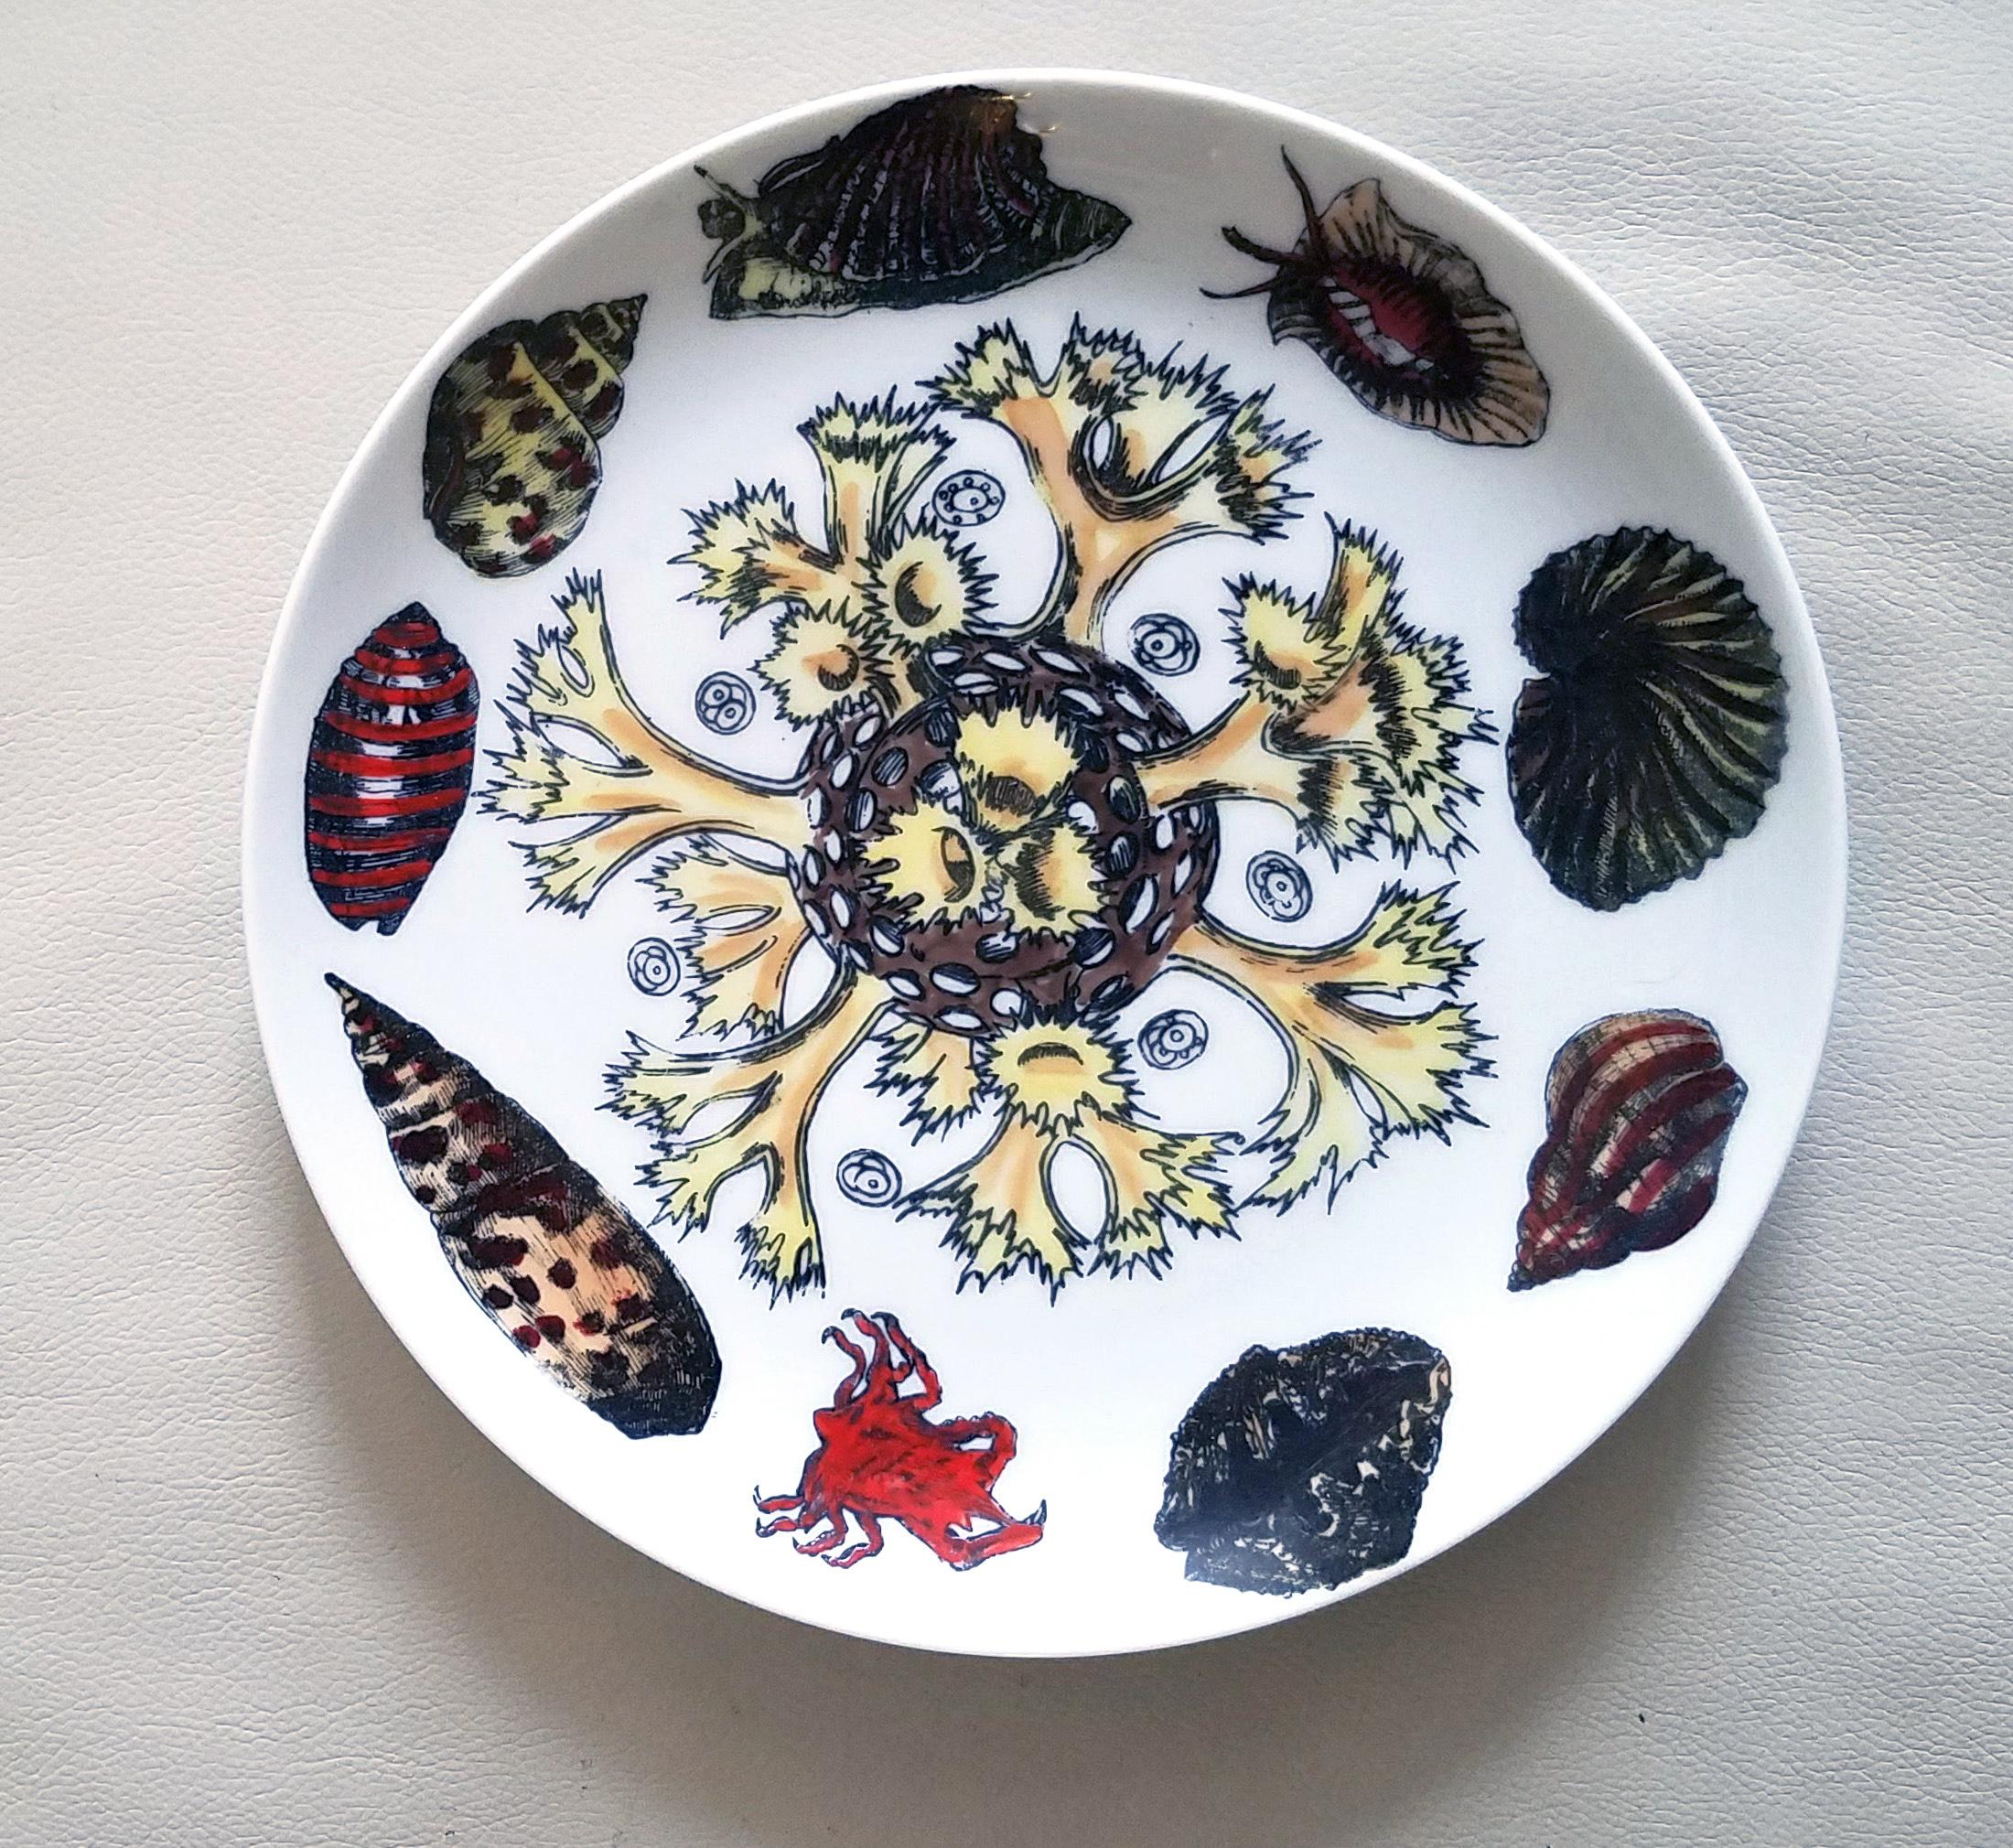 Pair of Vintage Piero Fornasetti Porcelain Plates,
decorated with sea anemones, urchins and shells,
#7 & #12 from Conchiglie Pattern,
Circa 1960-1970s.

The Fornasetti plates are decorated in the Conchiglie pattern which depicts different seashells